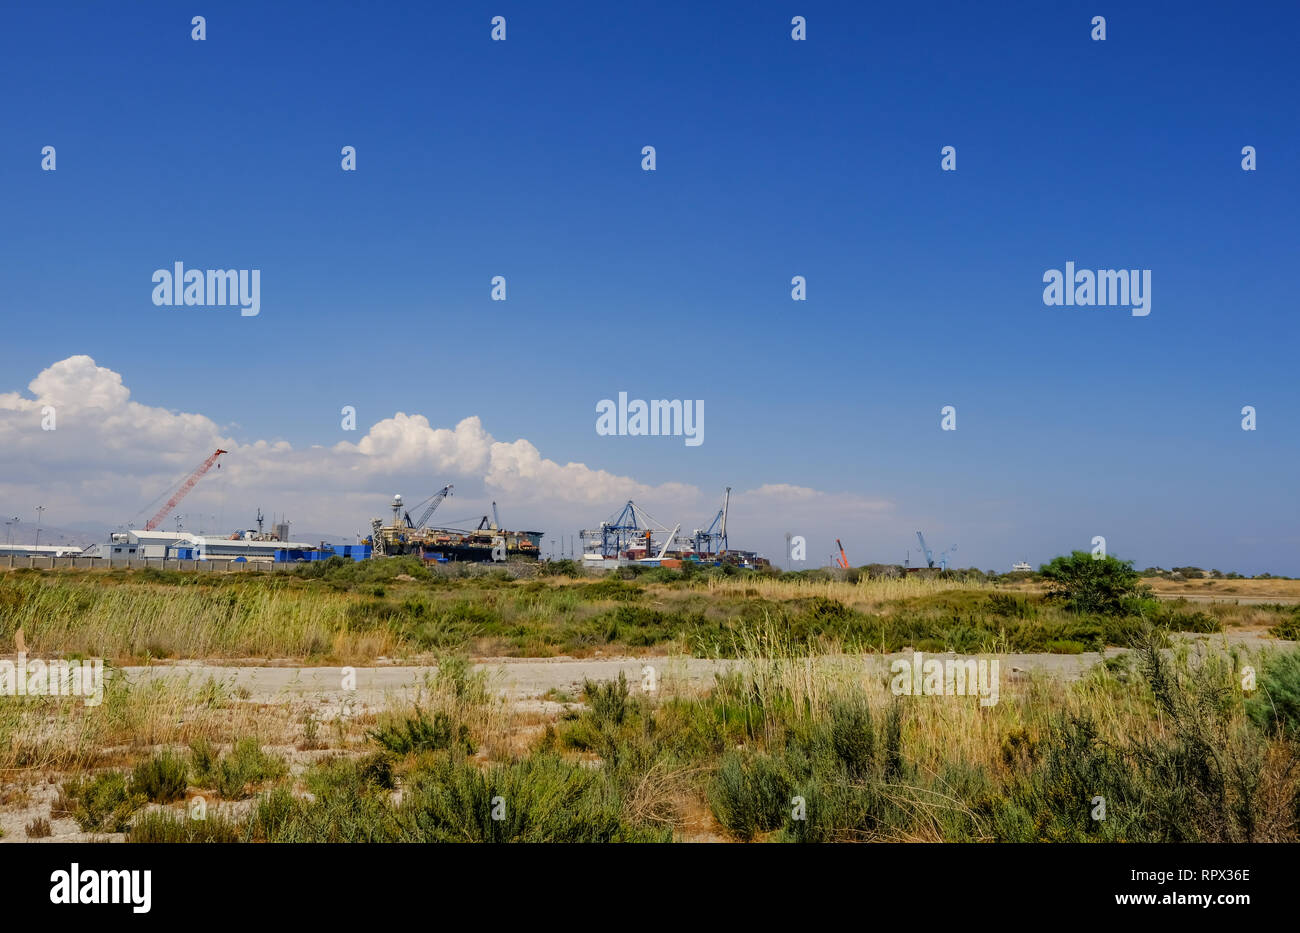 Limassol, Cyprus - June. 23, 2018: View of Limassol docks taken from the wild grass land of Lady's Mile.  Taken on a bright blue sky summer's afternoo Stock Photo